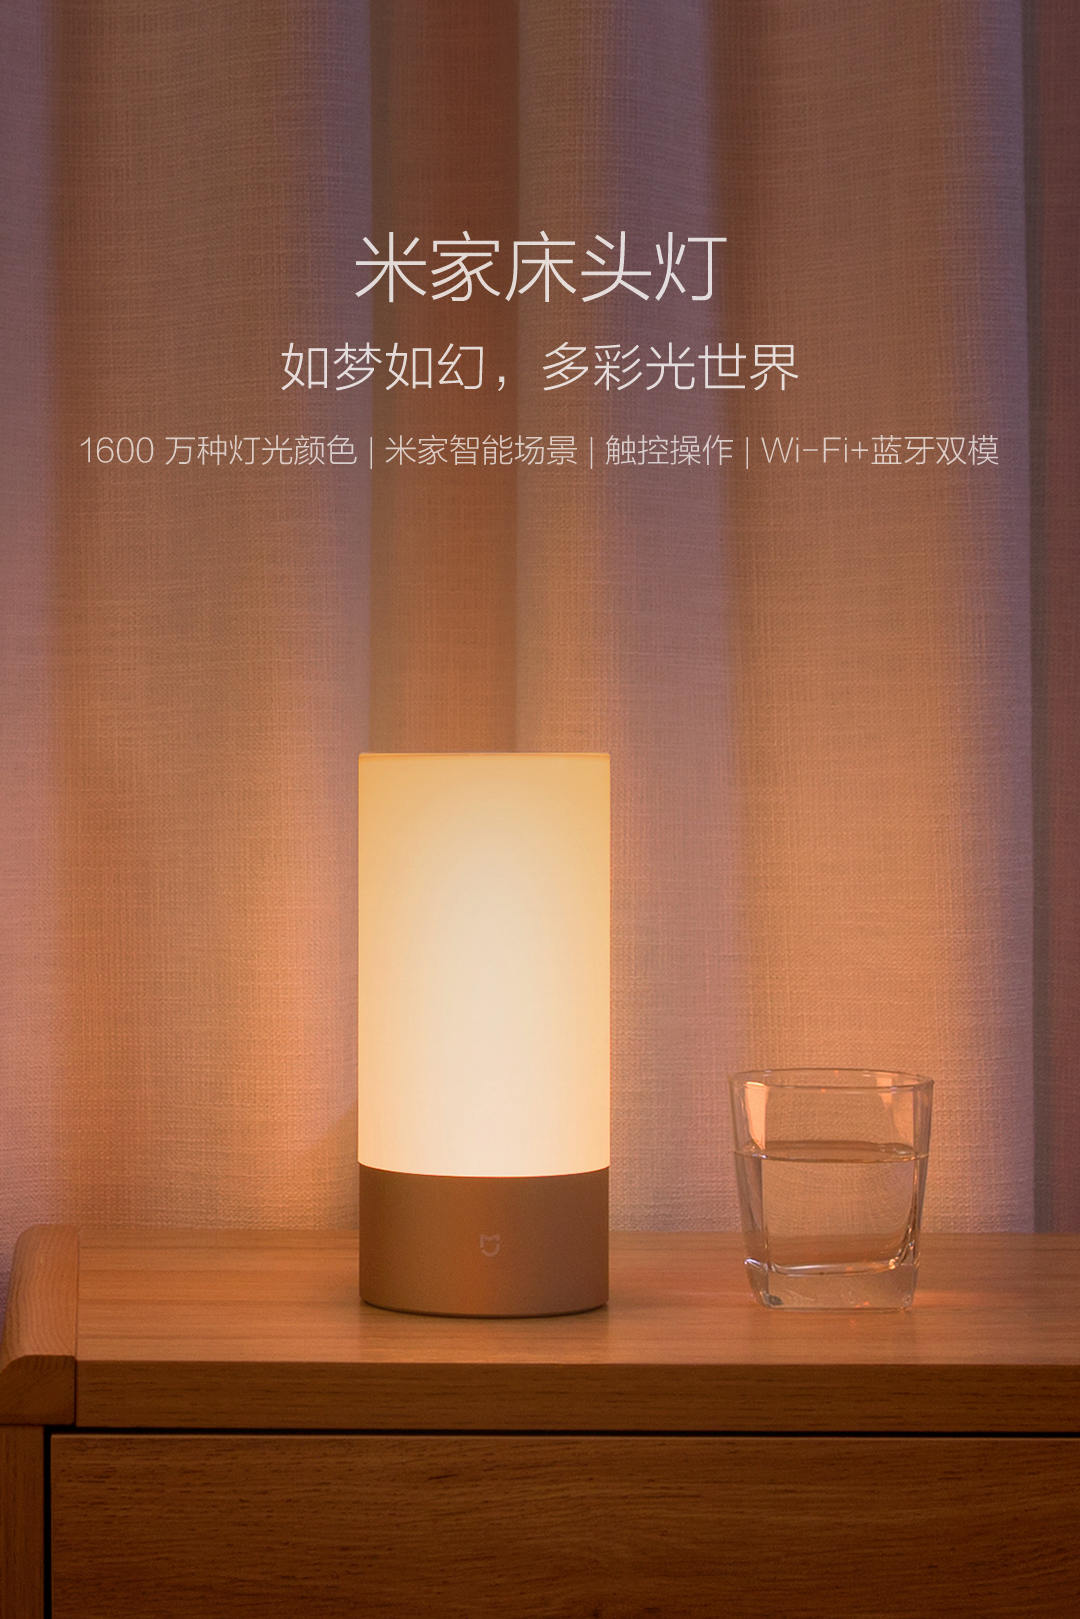 Xiaomi Launches Bedside Lamp, Nearly Identical to Yeelight's - Gizmochina